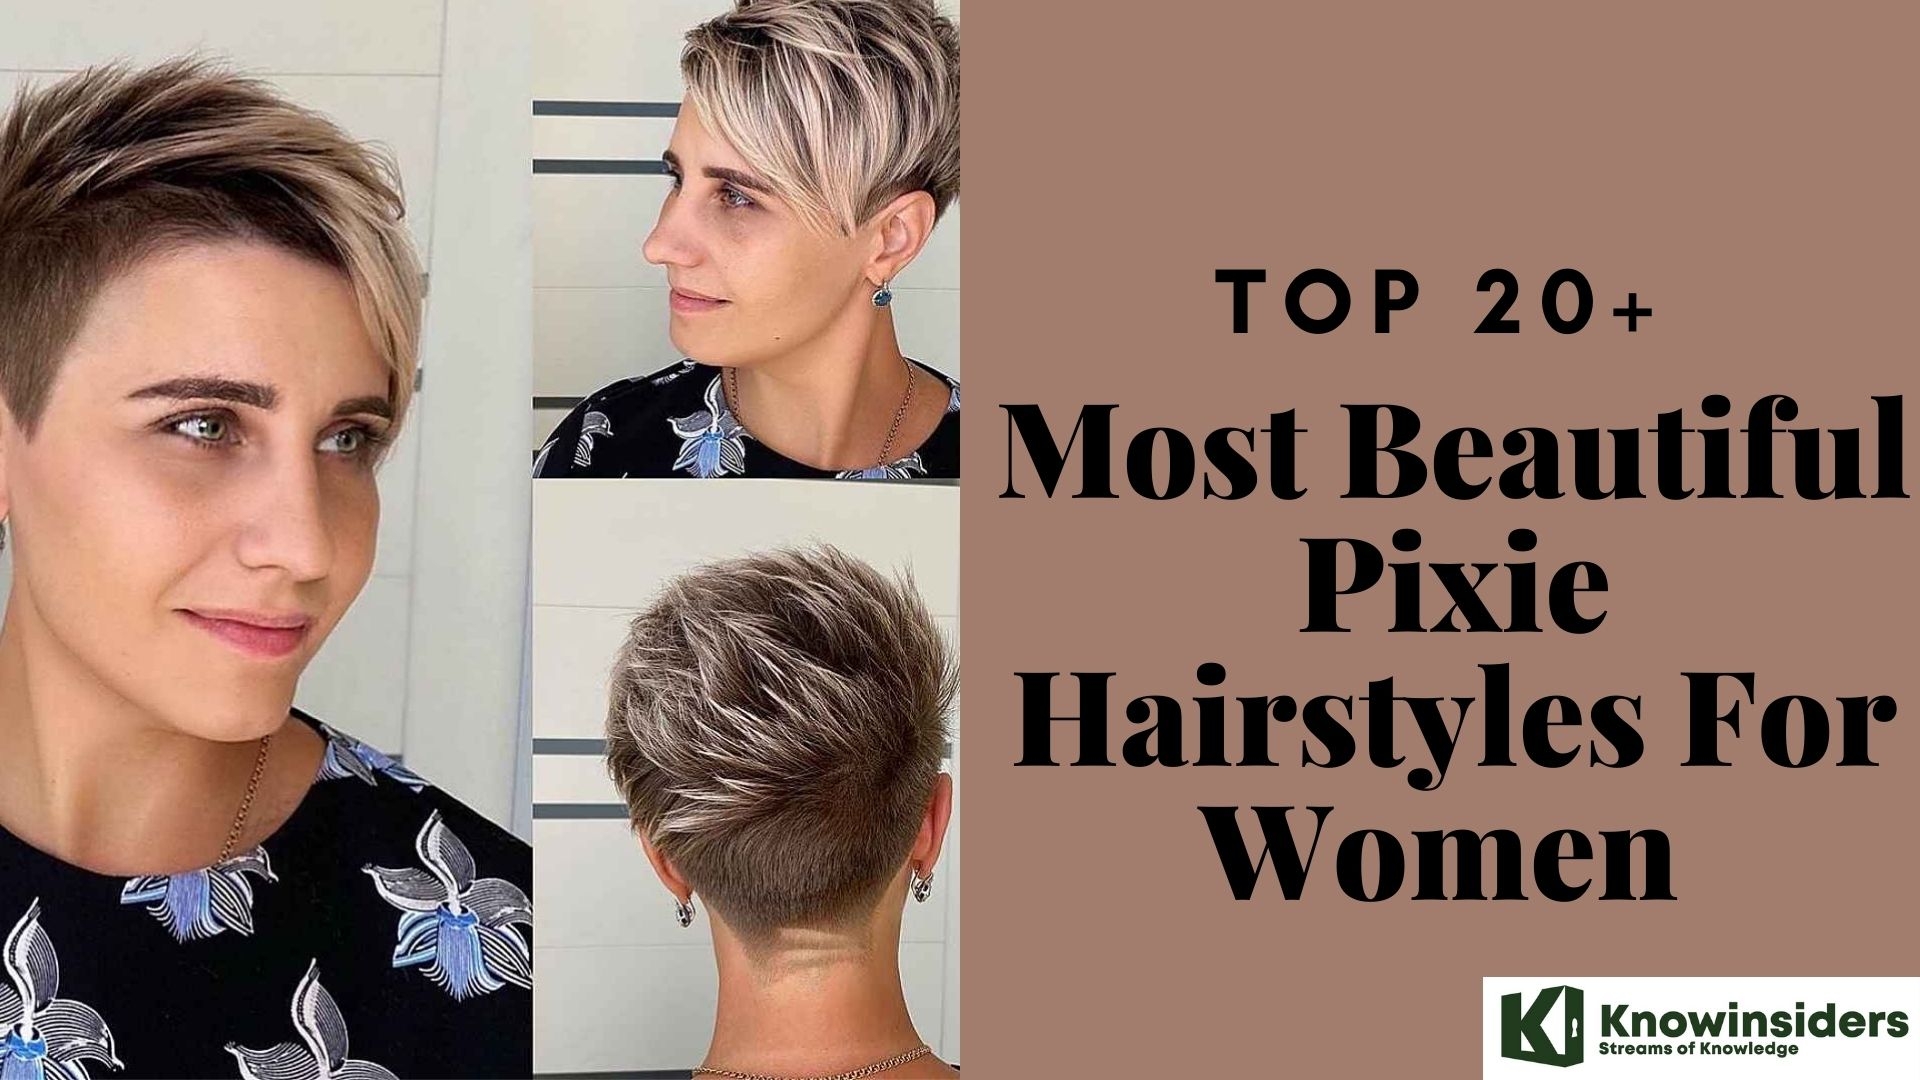 Top 20+ Most Beautiful Pixie Hairstyles For Women in Summer